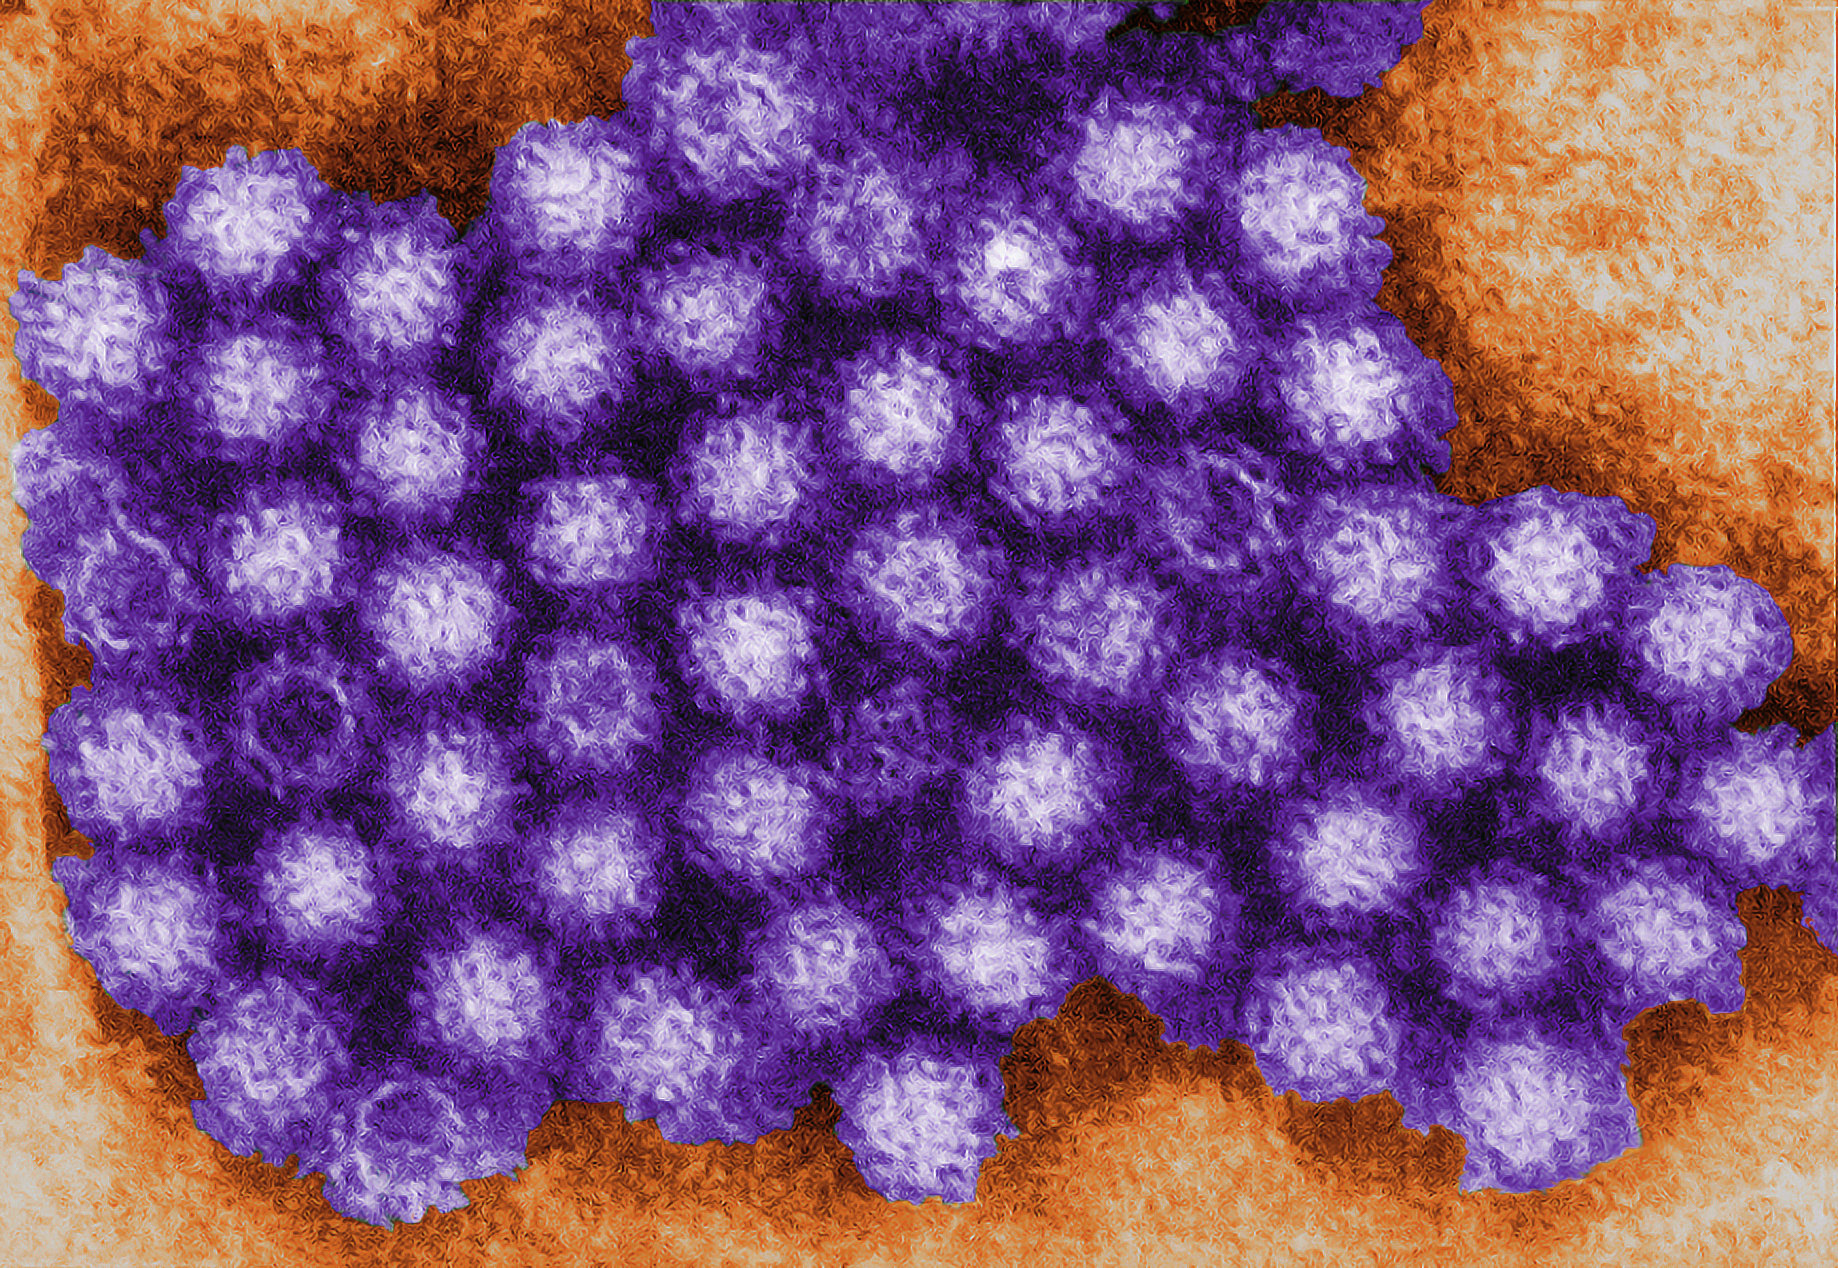 Transmission electron micrograph of a norovirus. Courtesy of the Centers for Disease Control and Prevention 